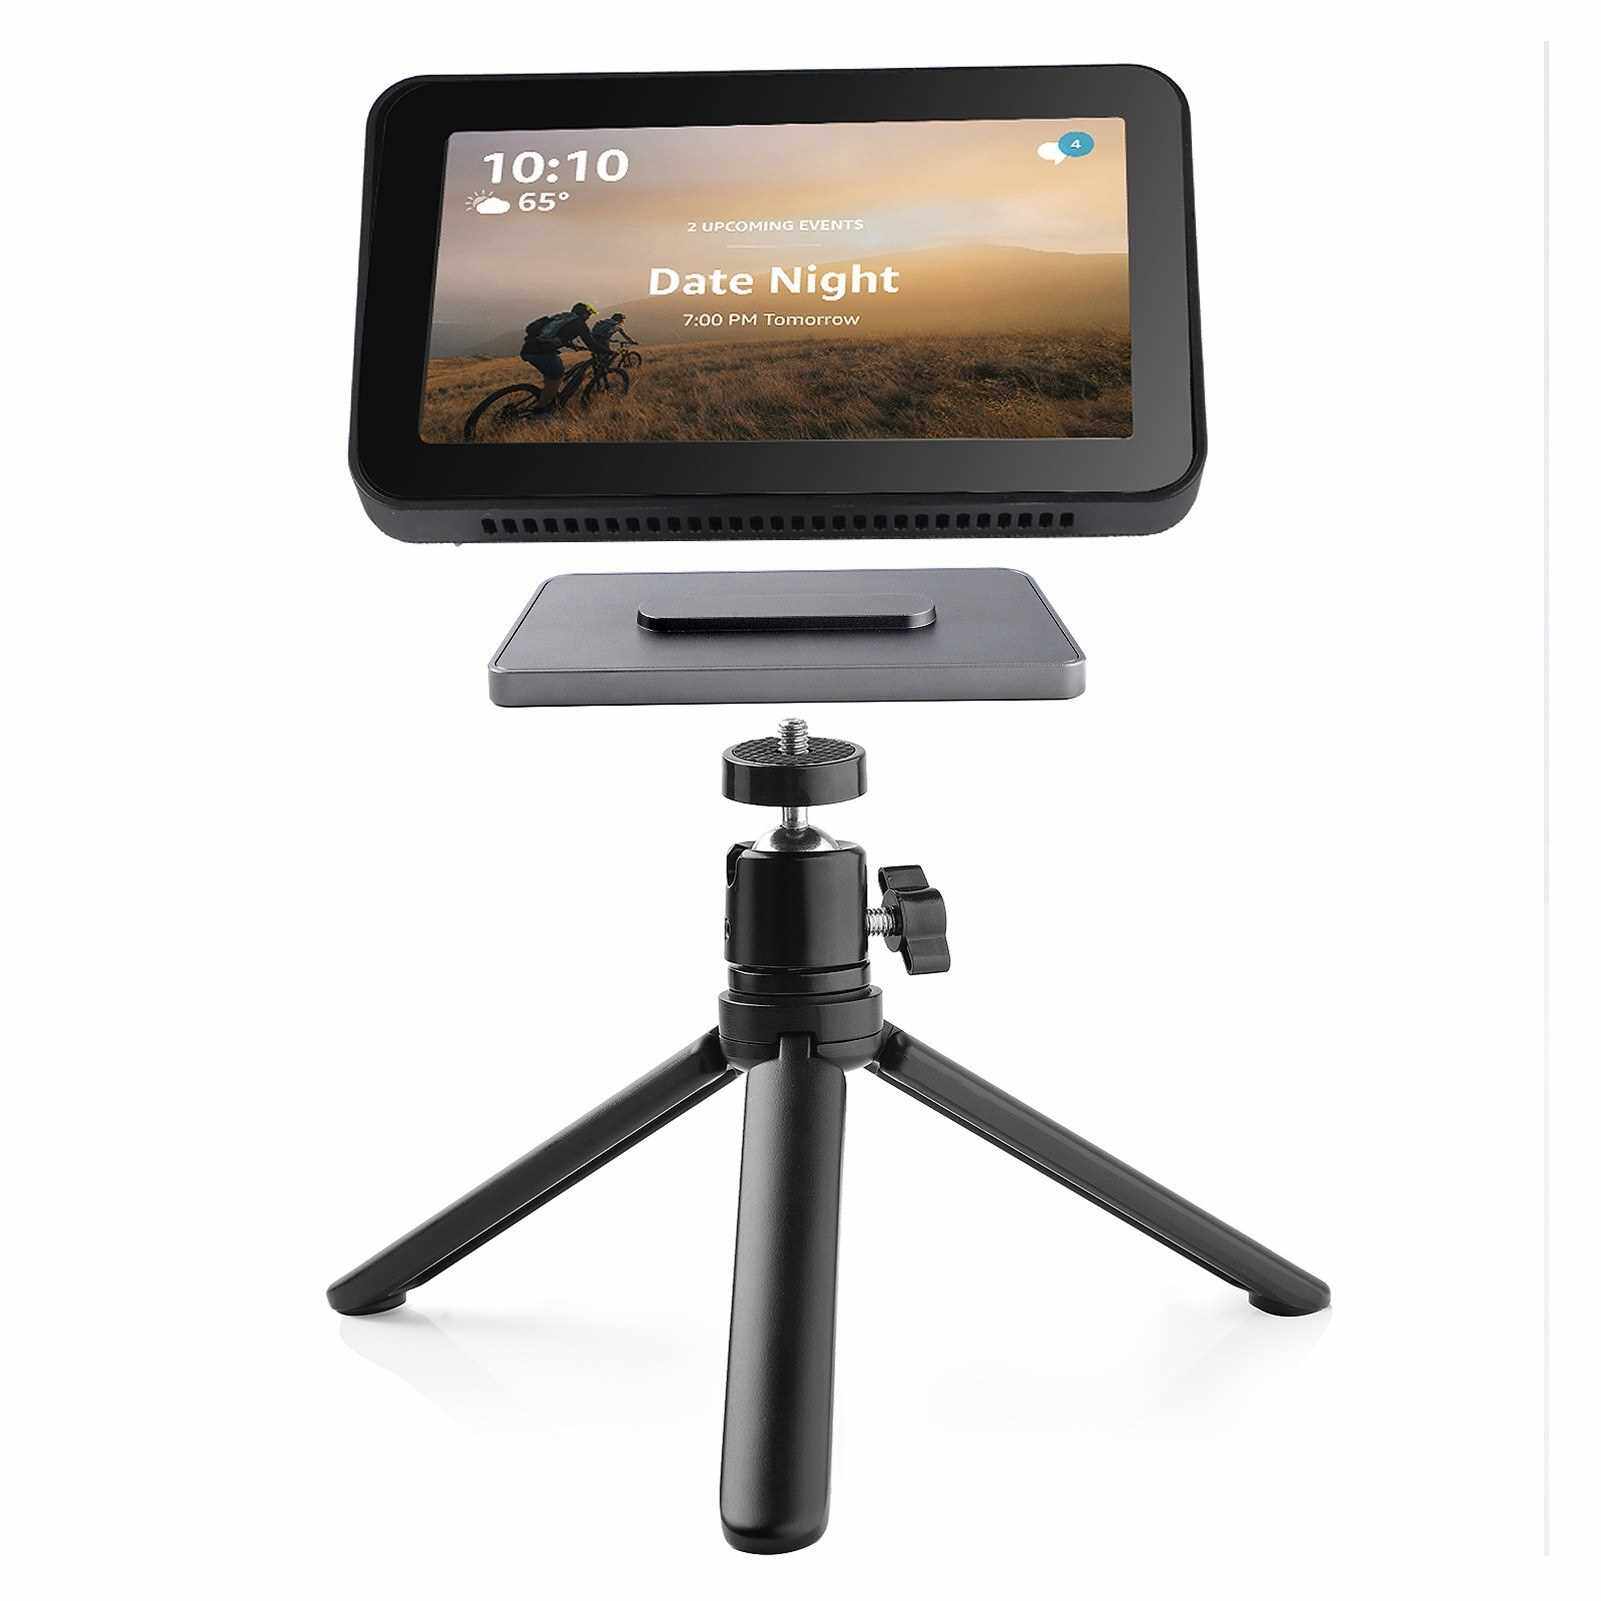 Stand Set Smart Speaker with Screen Replacement for Echo Show 5, Flexible Tripod Adjustable Stand Holder - Replacement for Echo Show 5 Stand with Magnetic 360 Degree Rotatable Spherical Tripod for Kitchen, Bedroom, Office (Standard)